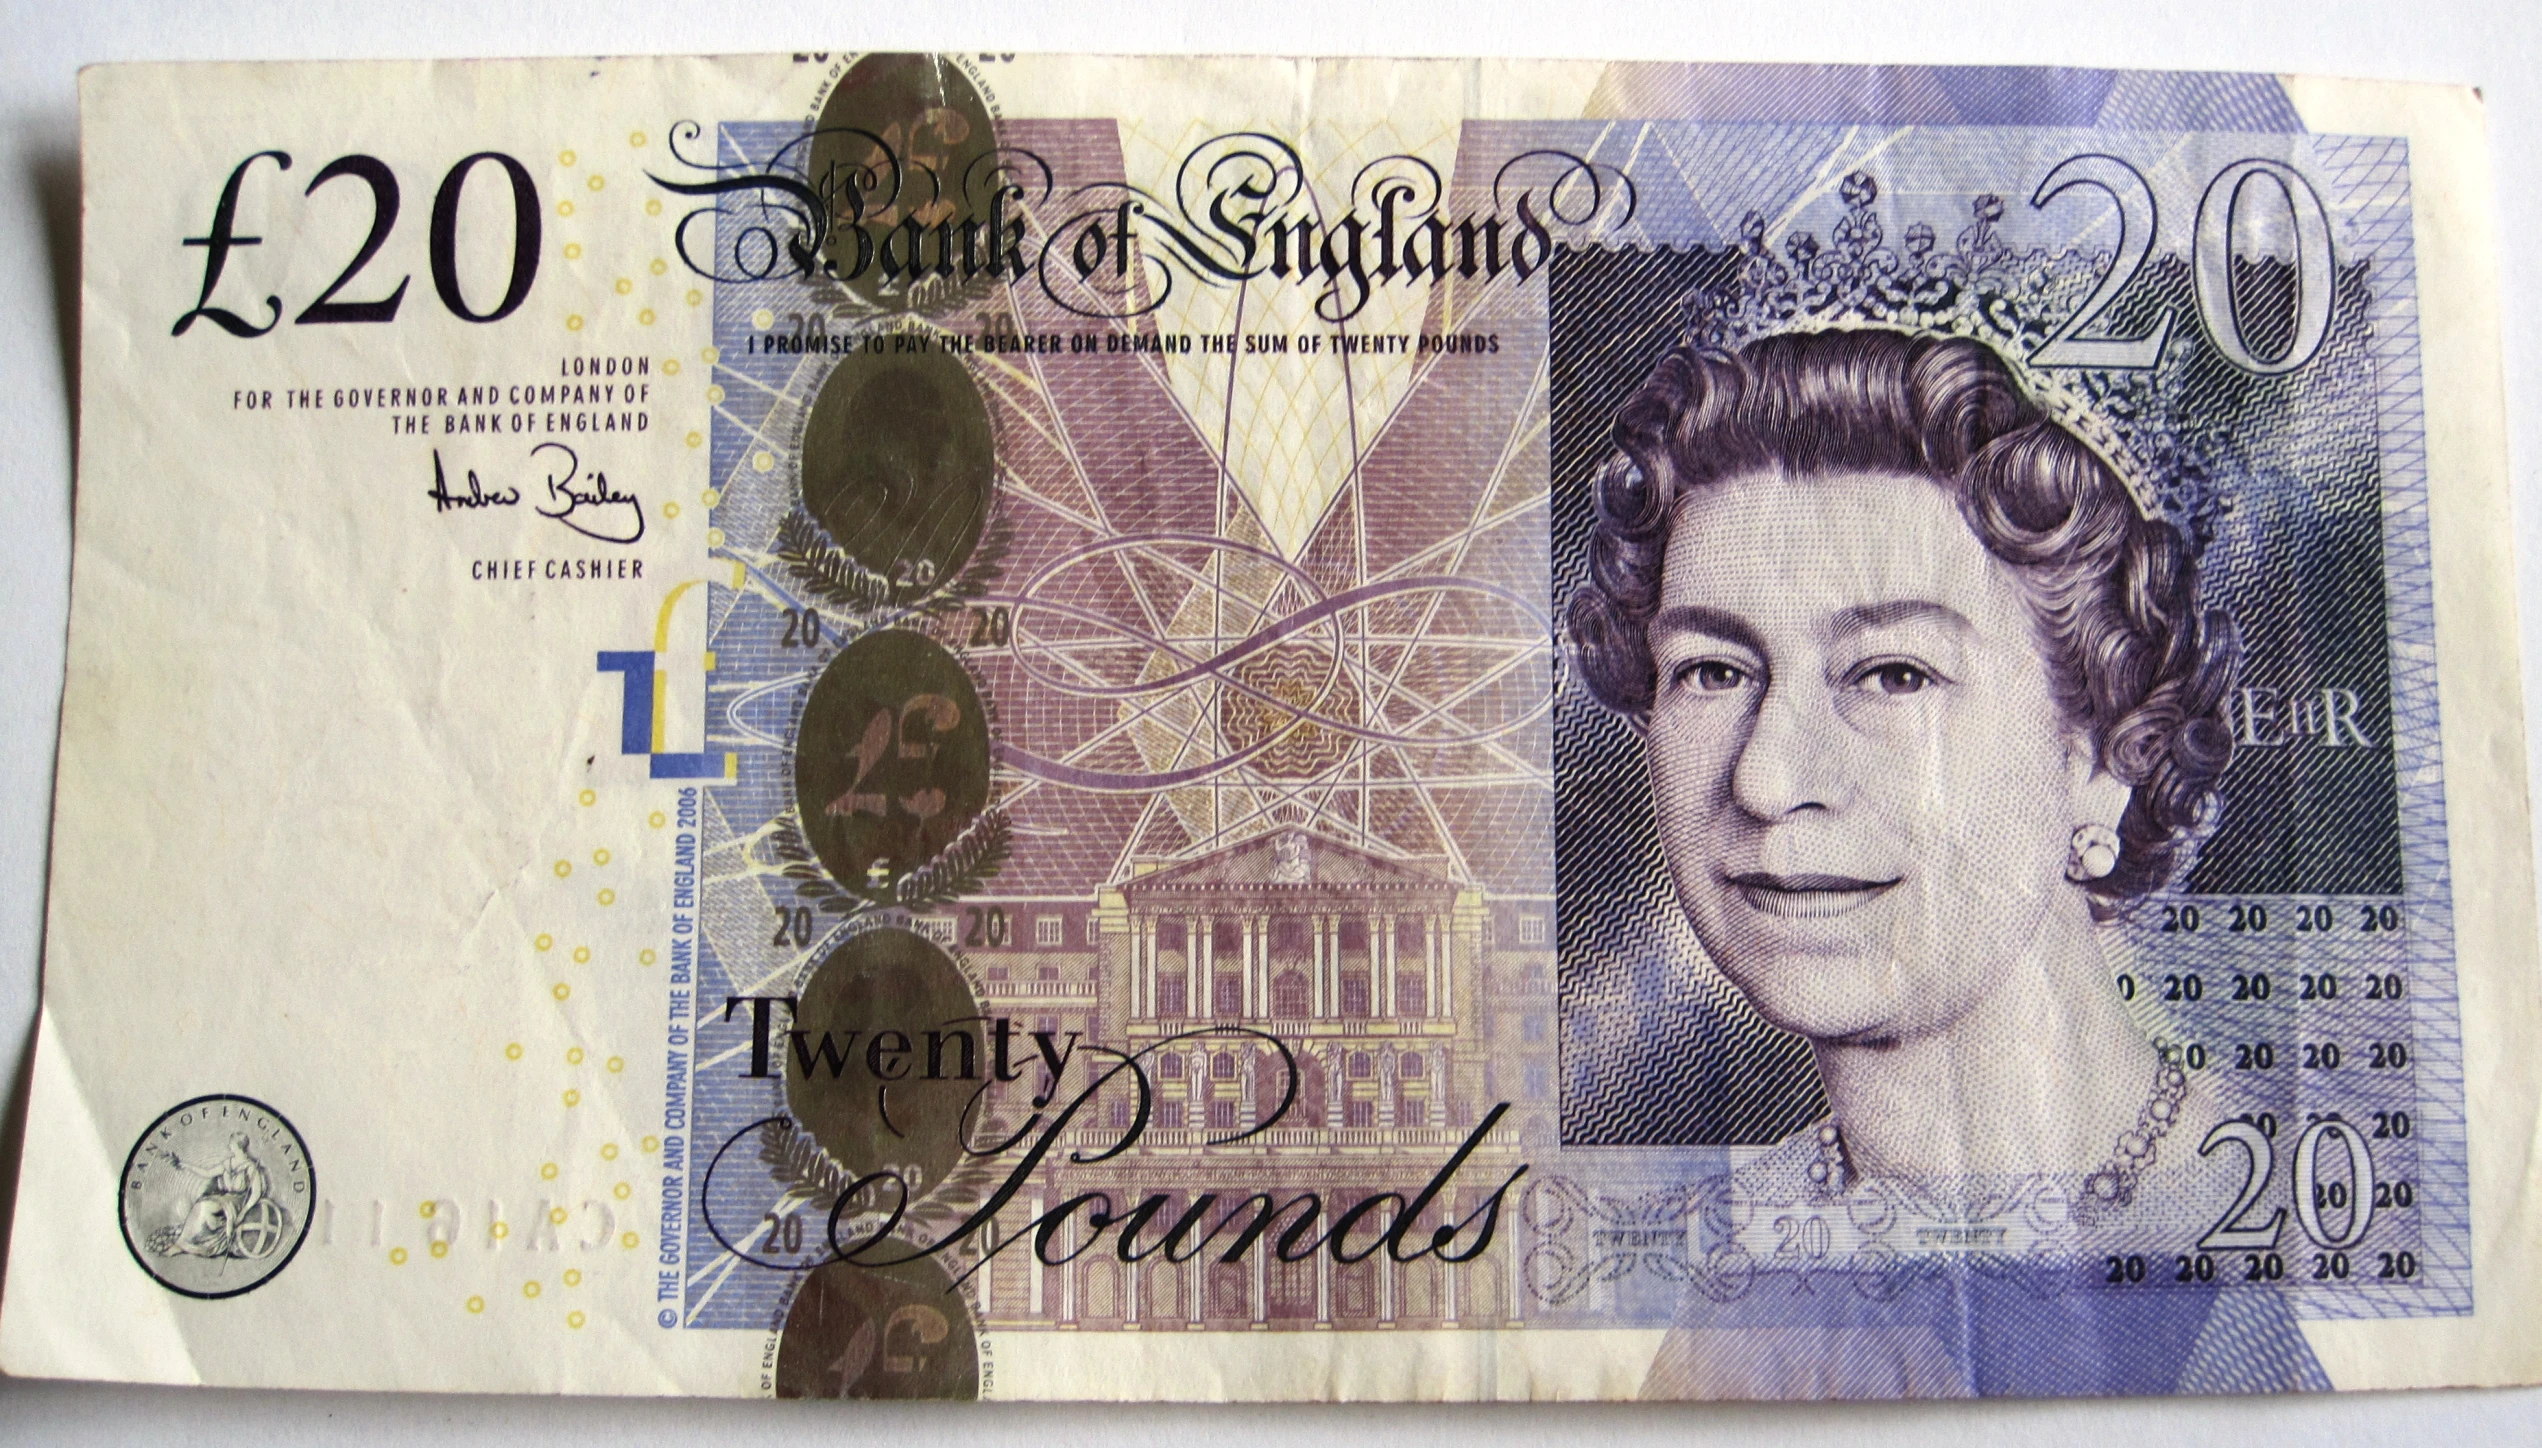 there is an old one hundred pound note